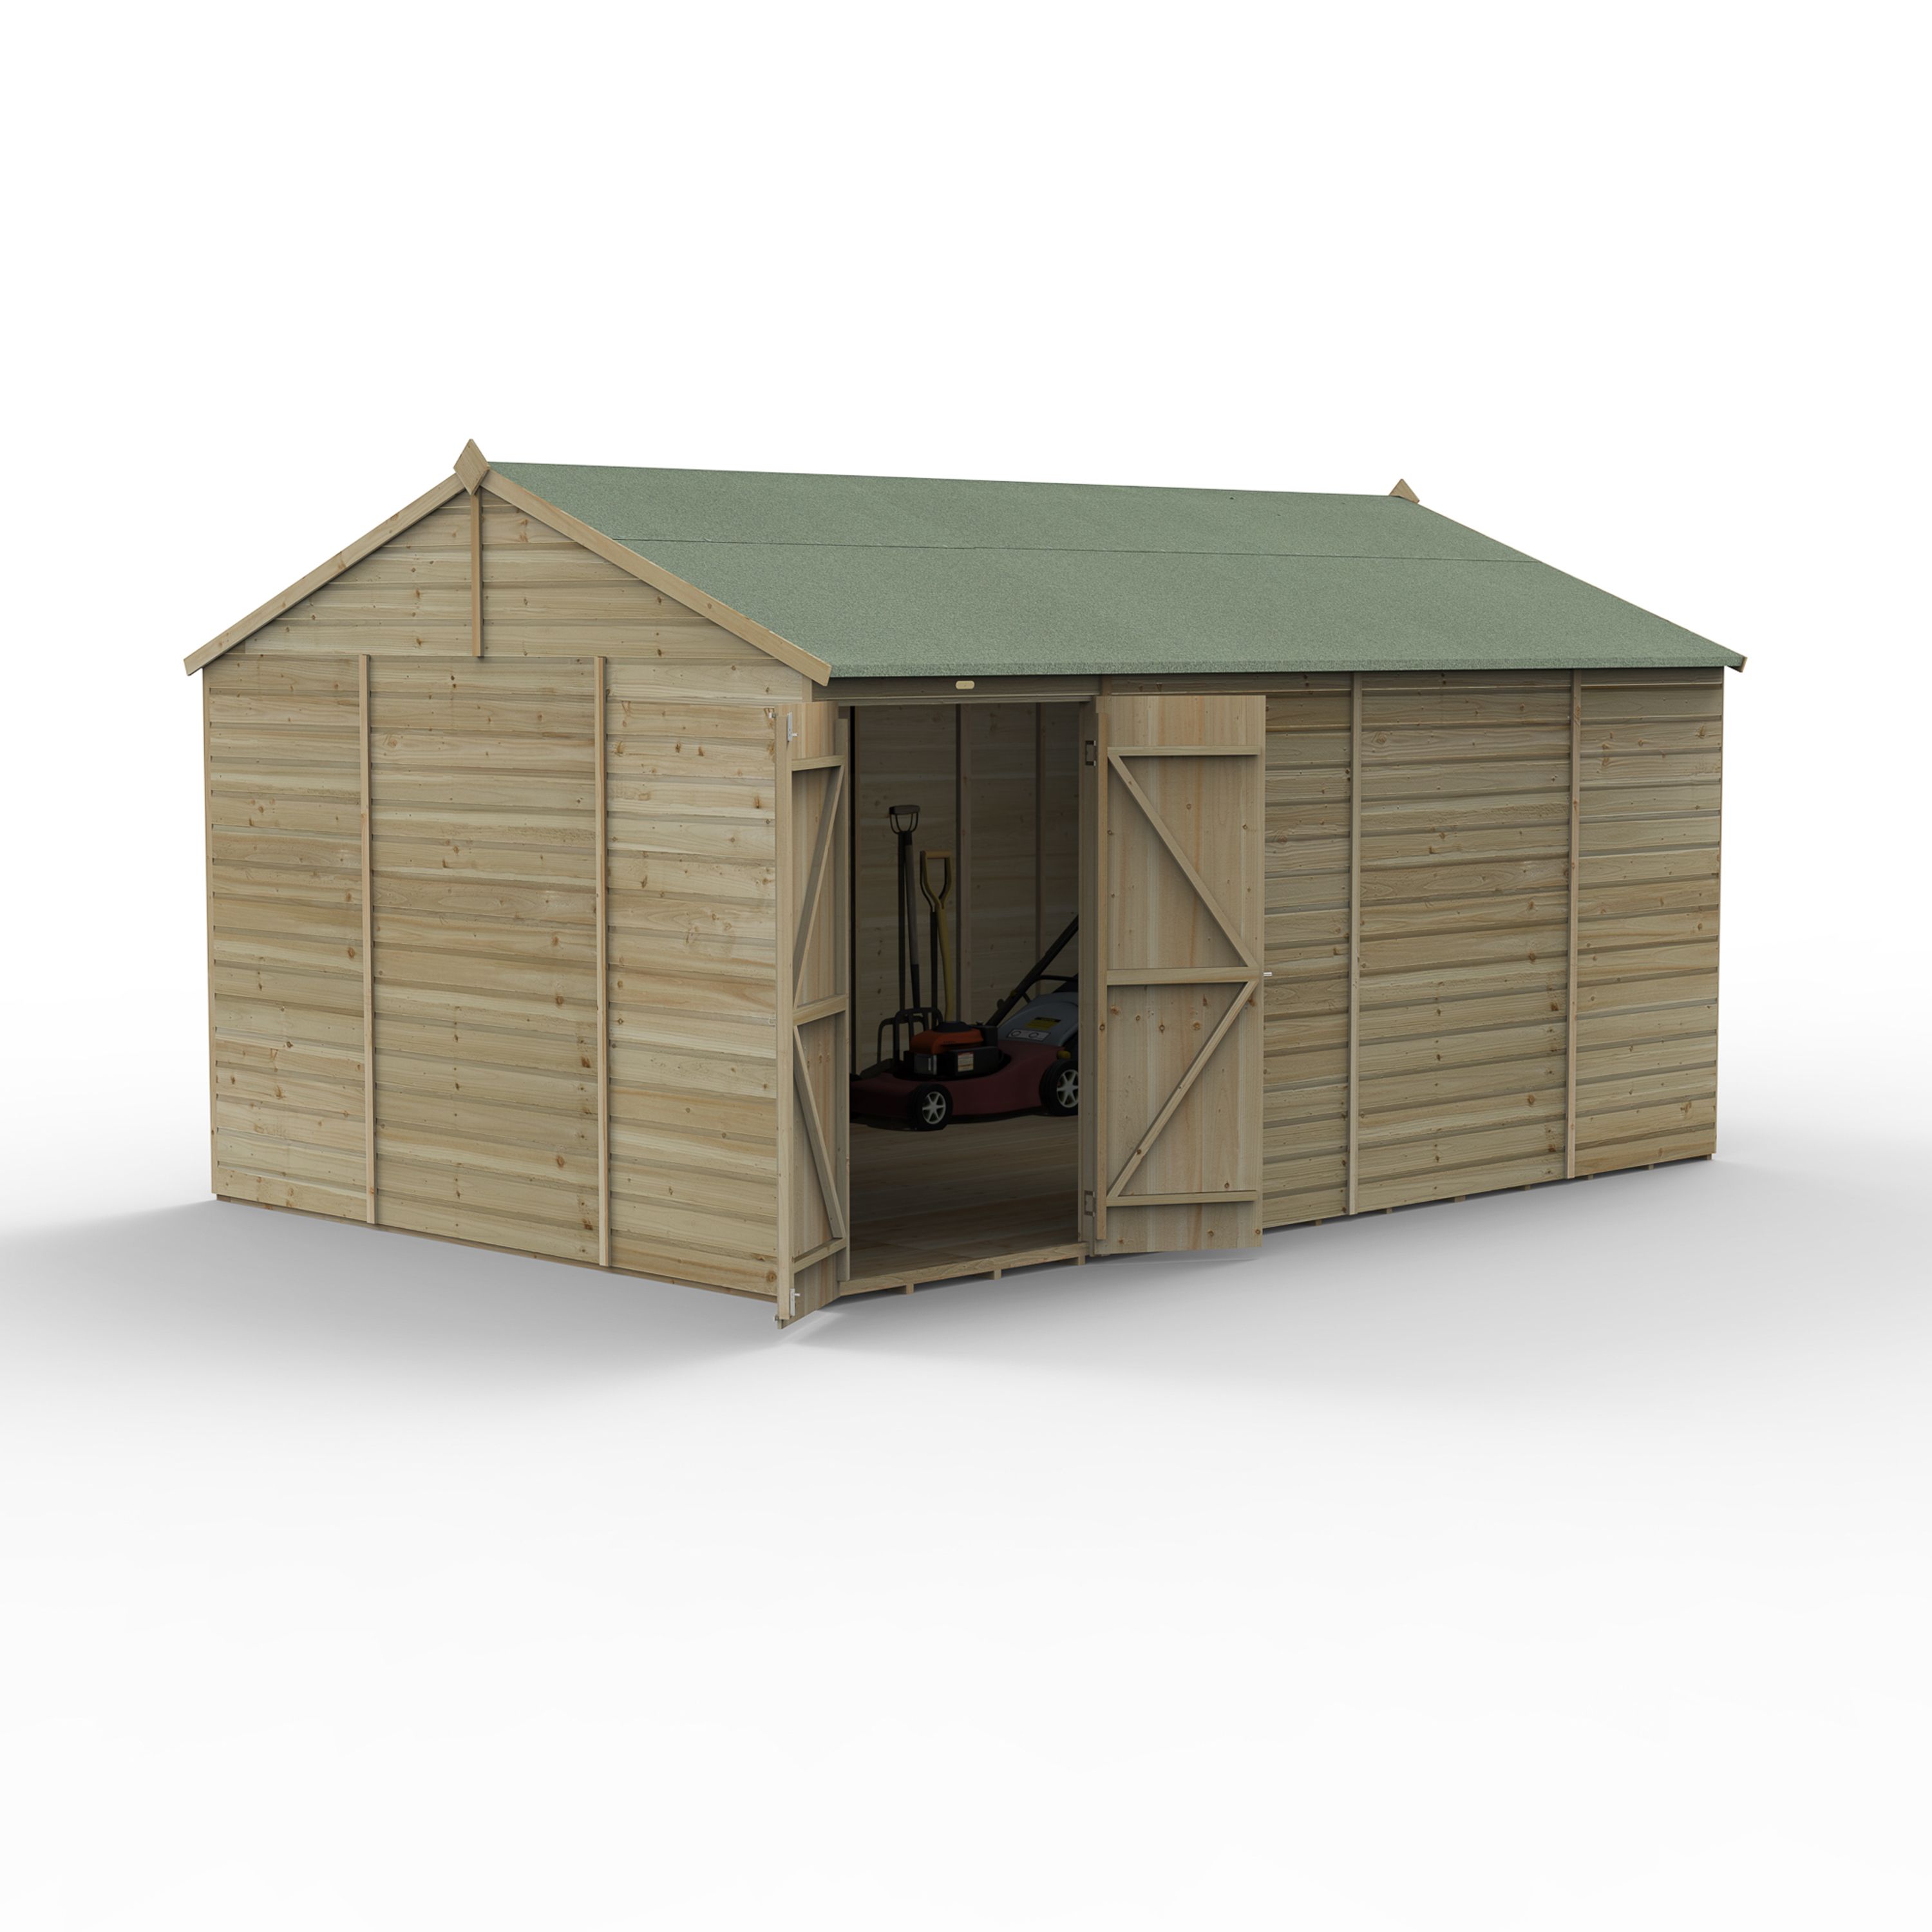 Forest Garden Beckwood 10x15 ft Reverse apex Natural timber Wooden 2 door Shed with floor - Assembly not required